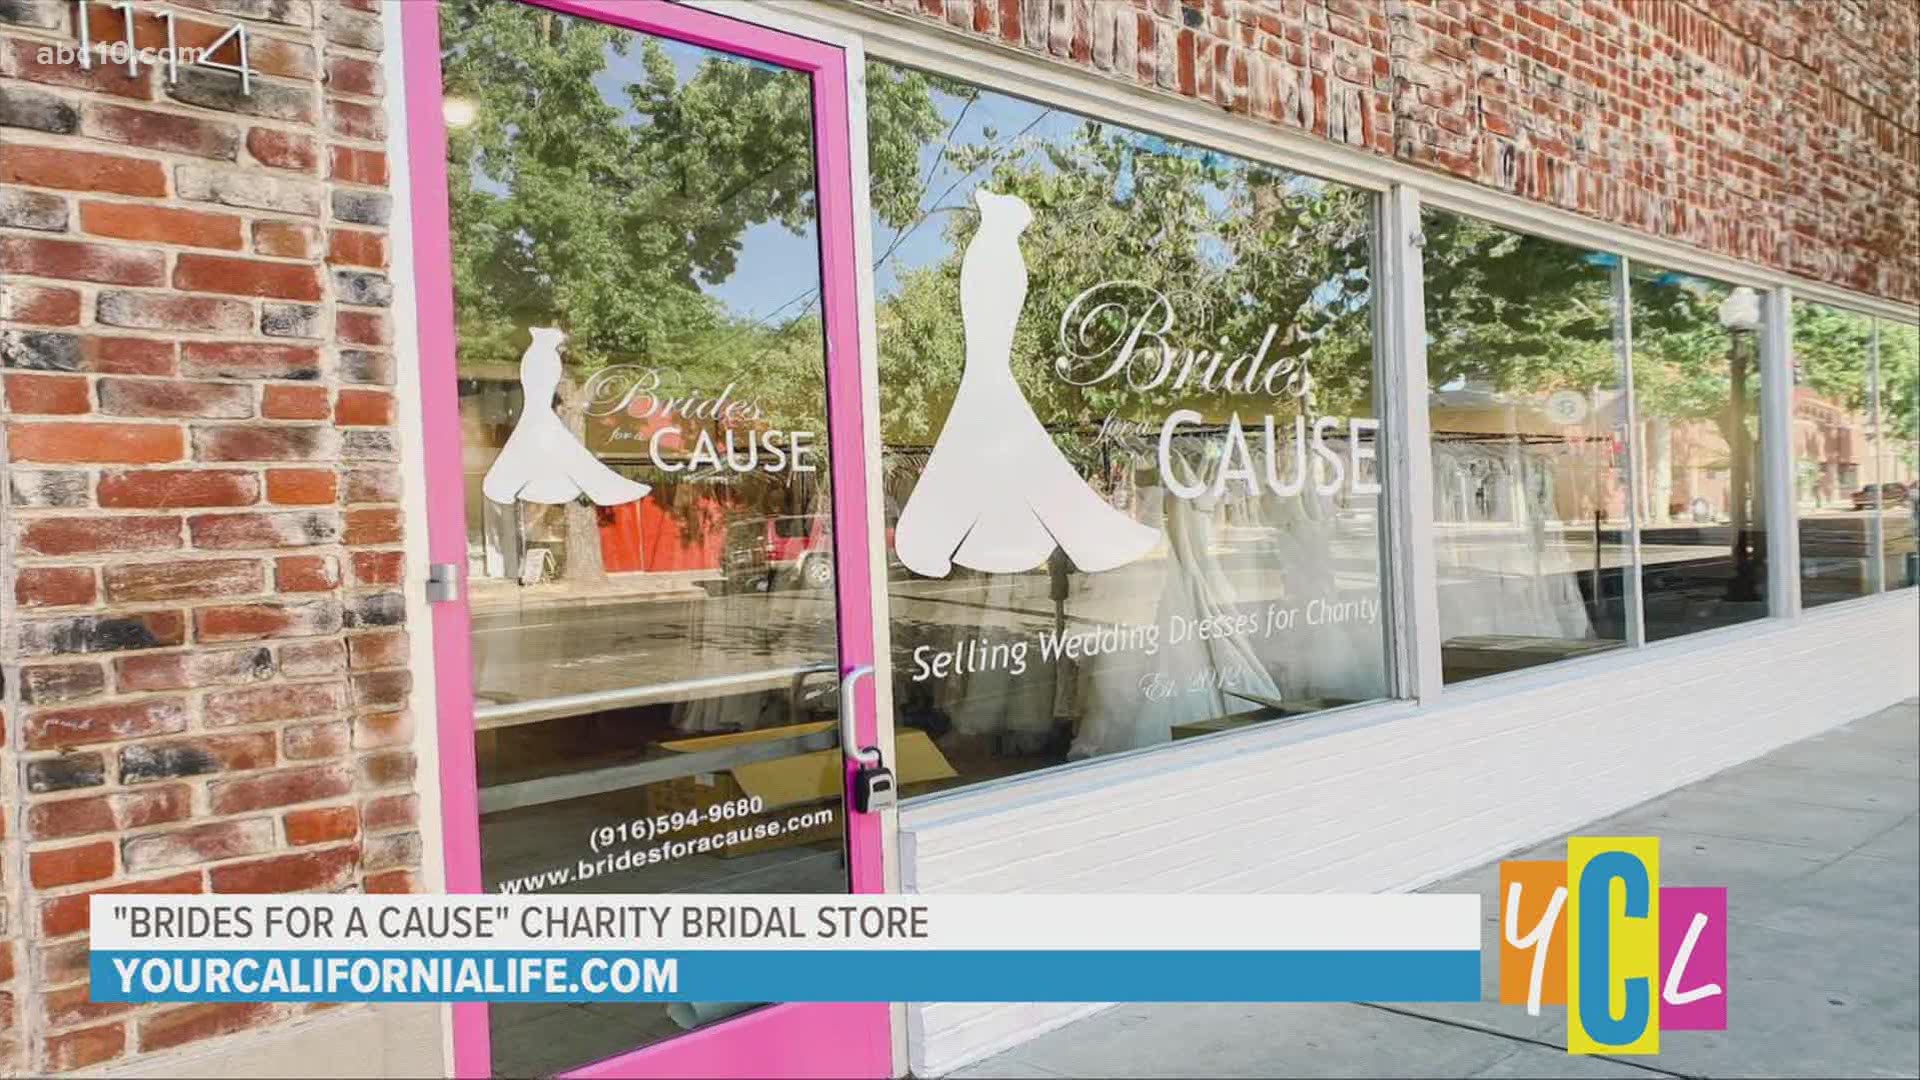 A charitable way for brides to say "YES to the dress!” We get a first look at a brand new Midtown Sac bridal boutique with hundreds of discounted wedding dresses.